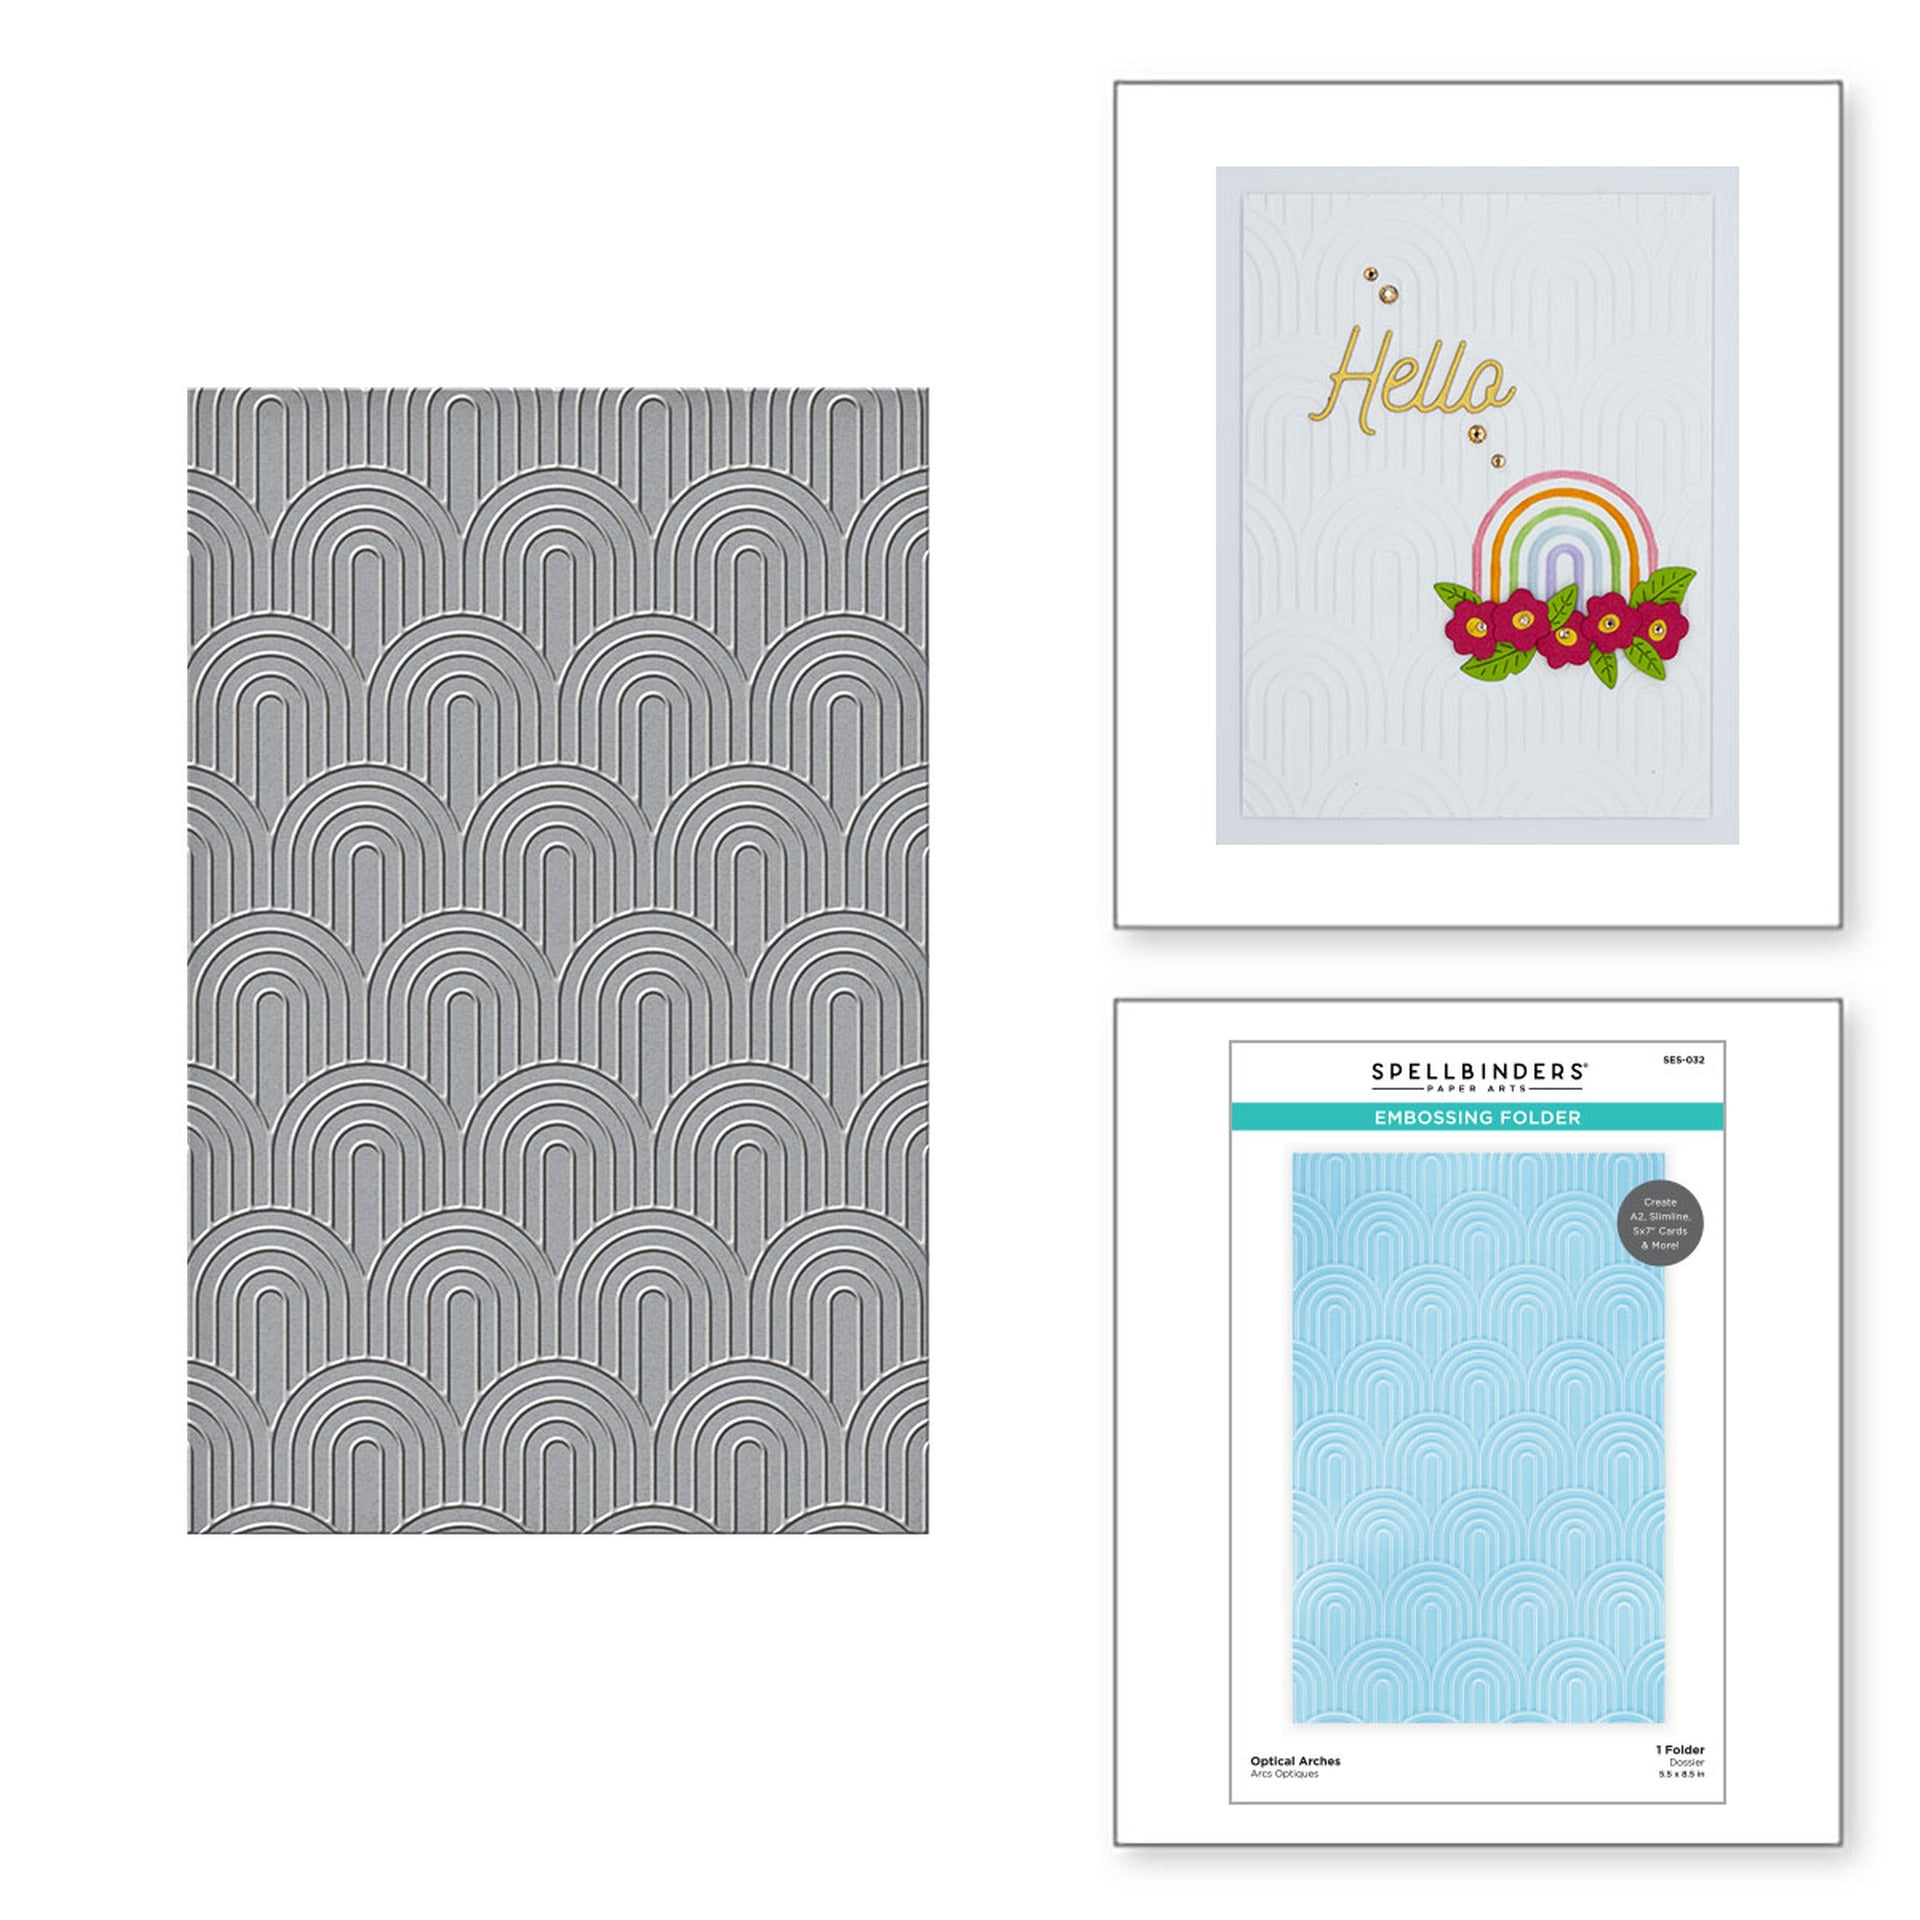 Spellbinders Optical Arches Embossing Folder 5.5x8.5 in